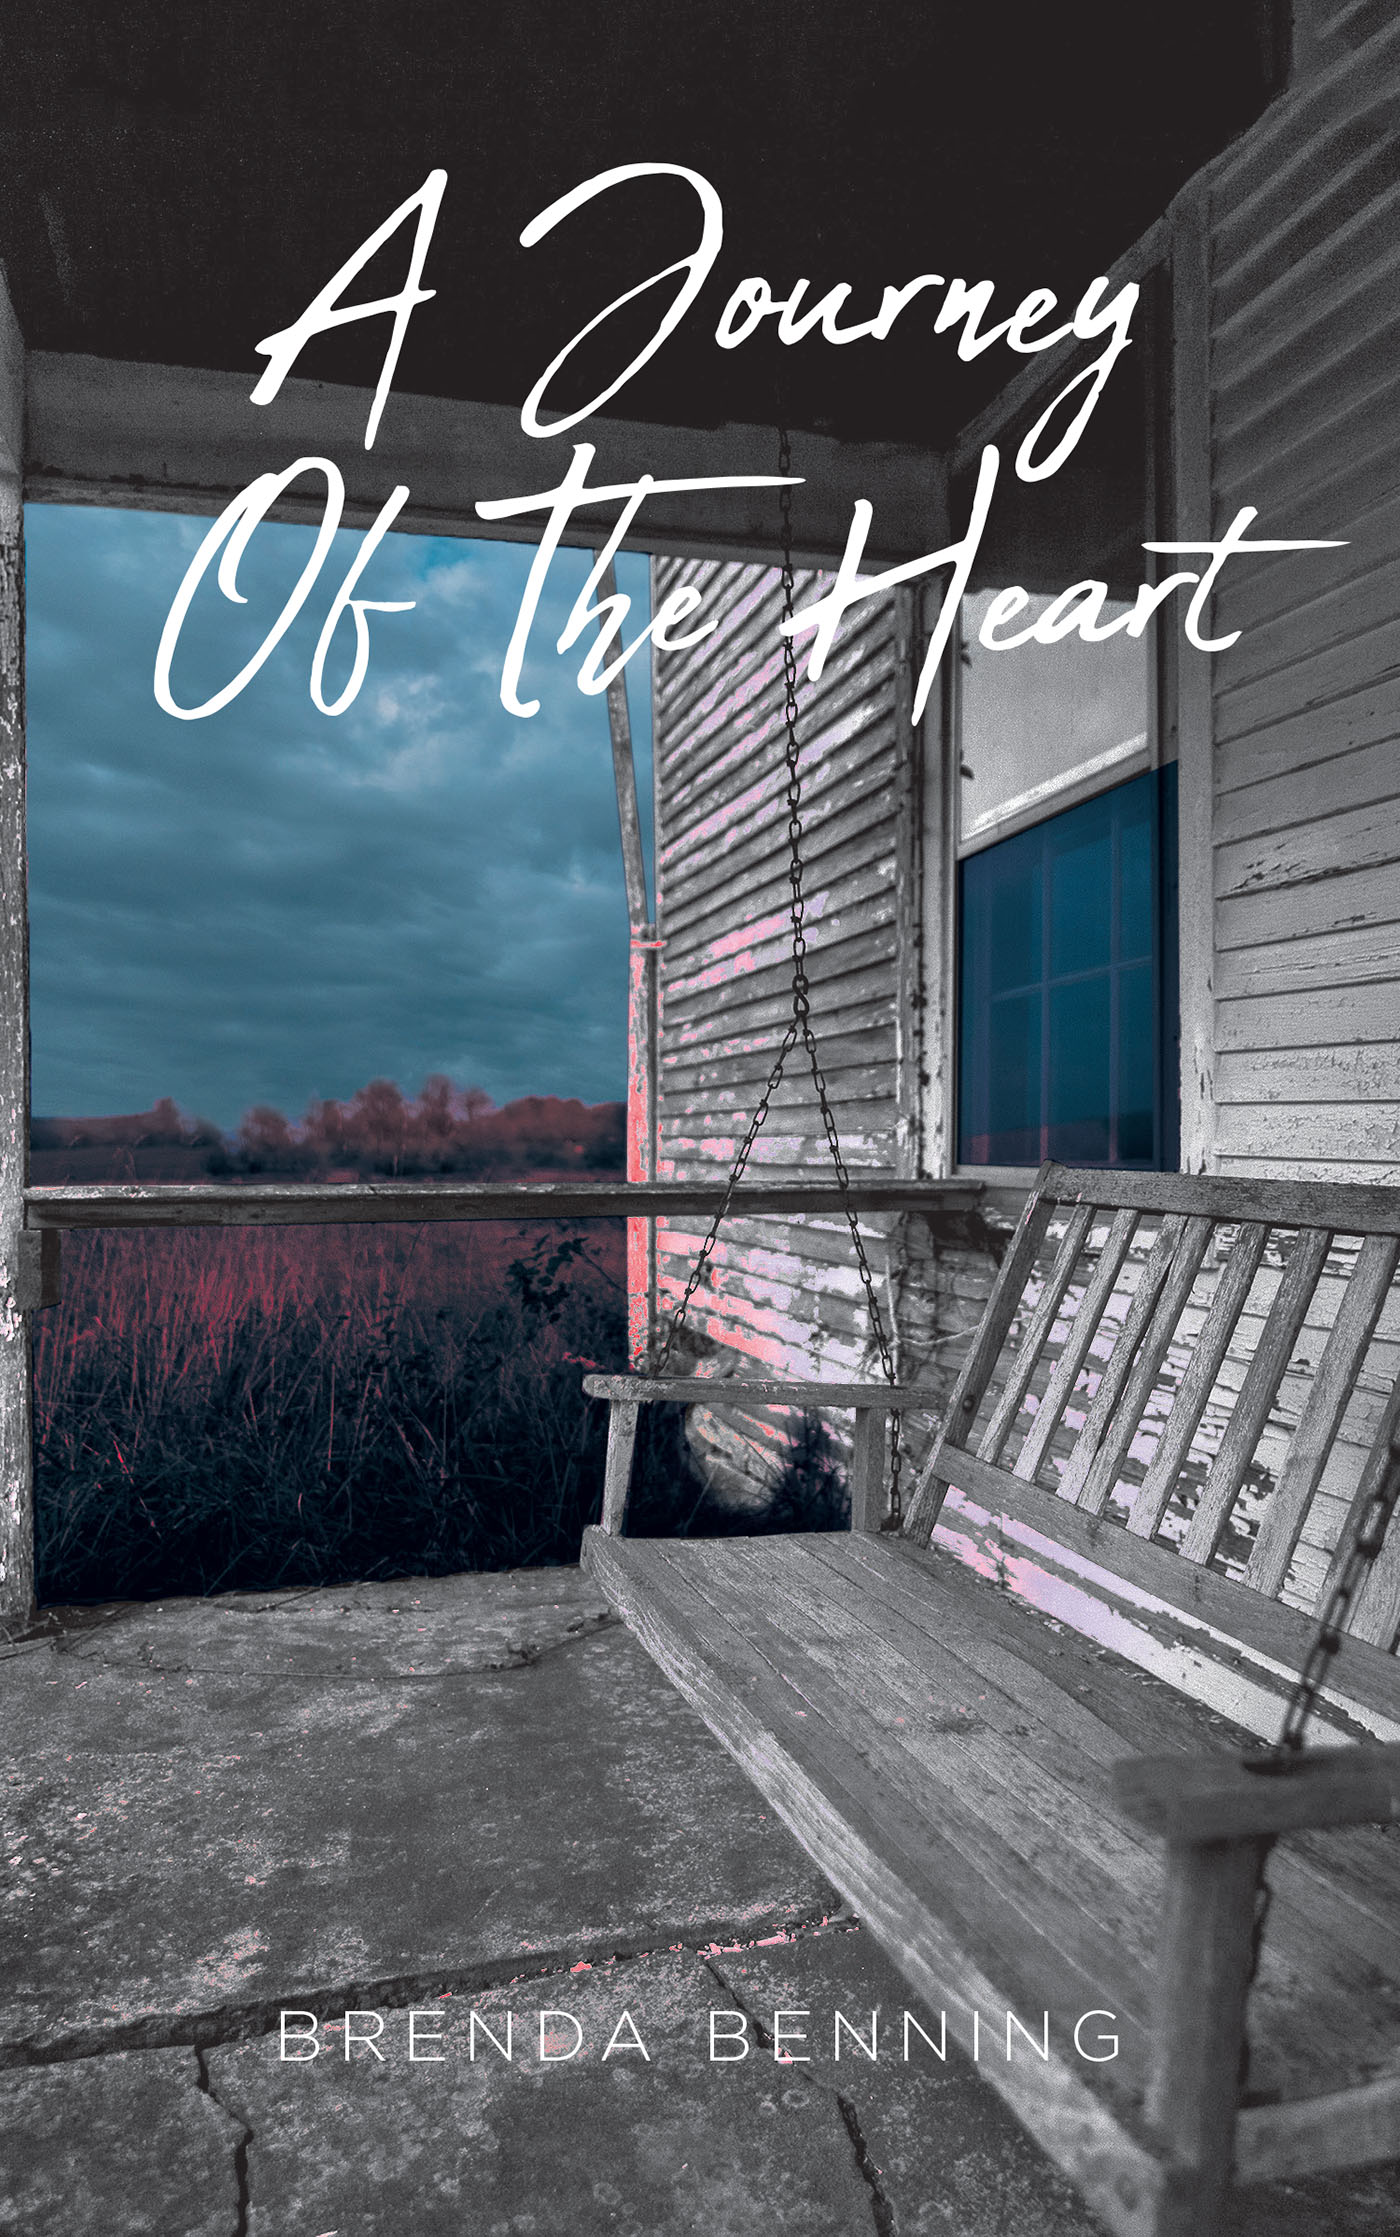 Brenda Benning’s New Book, "A Journey of the Heart," Follows a Young Woman Whose Life is Turned Upside Down as She Begins Digging Into Her Late Mother's Mysterious Past